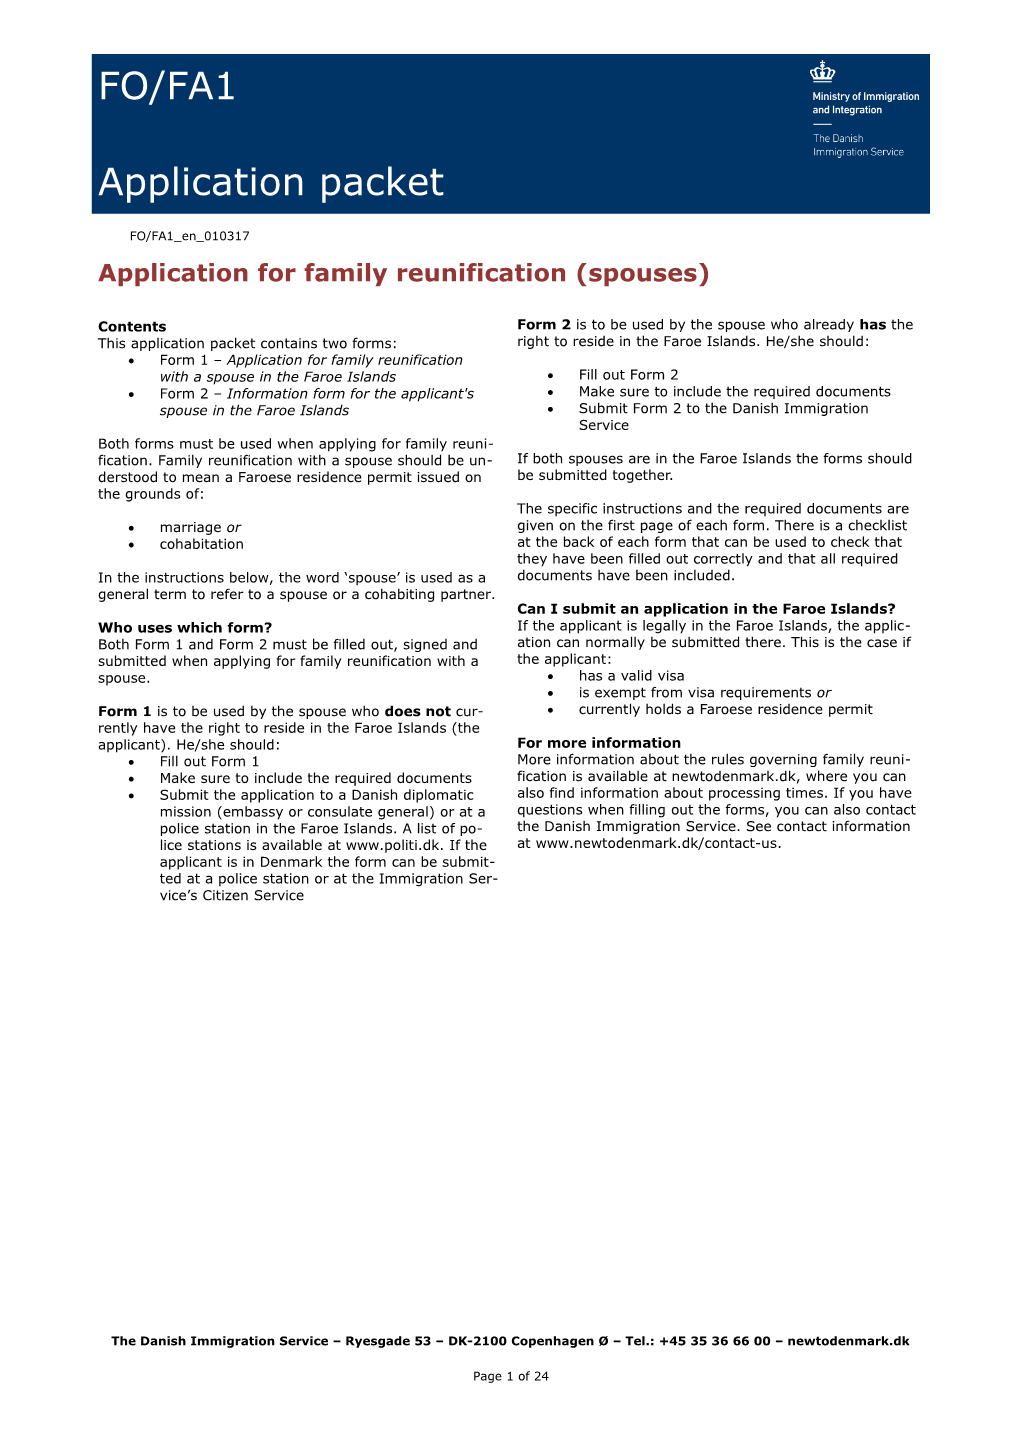 Application for Family Reunification (Spouses)